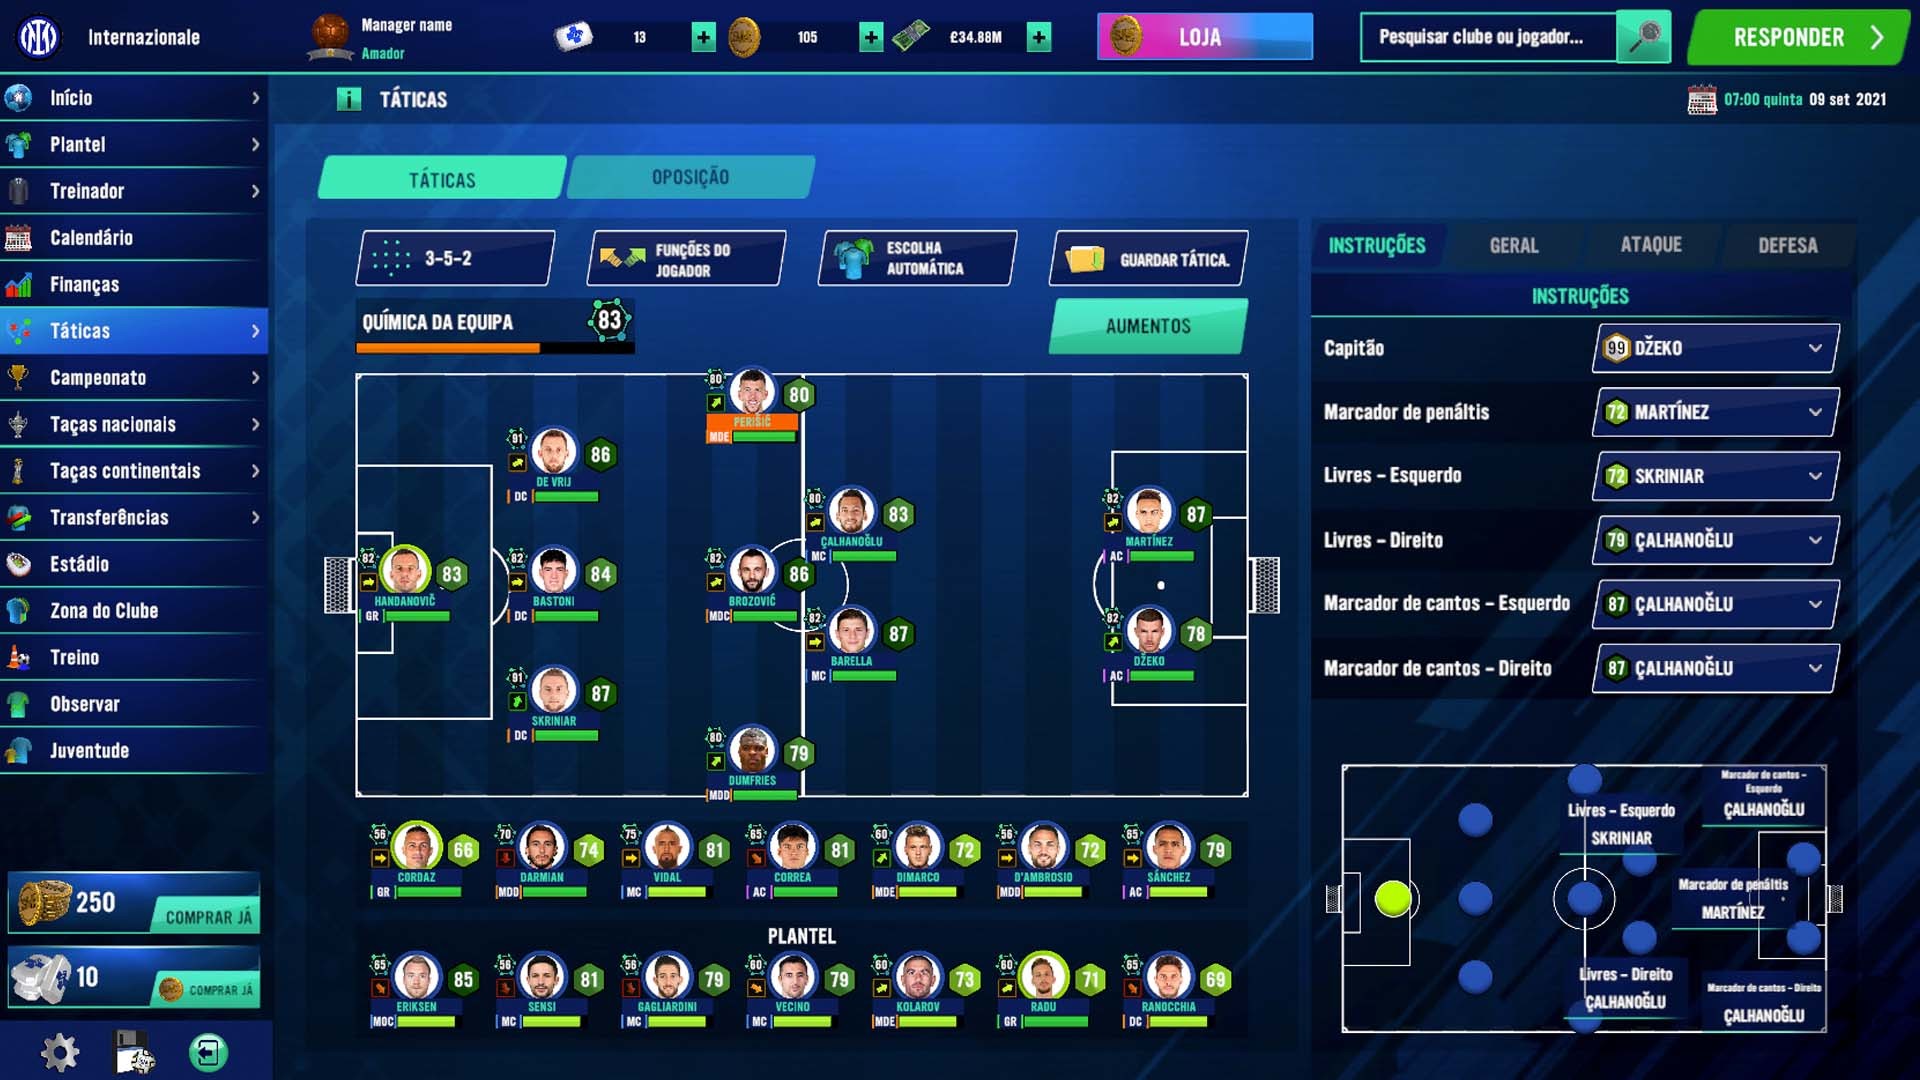 Soccer Manager 2022 no Steam